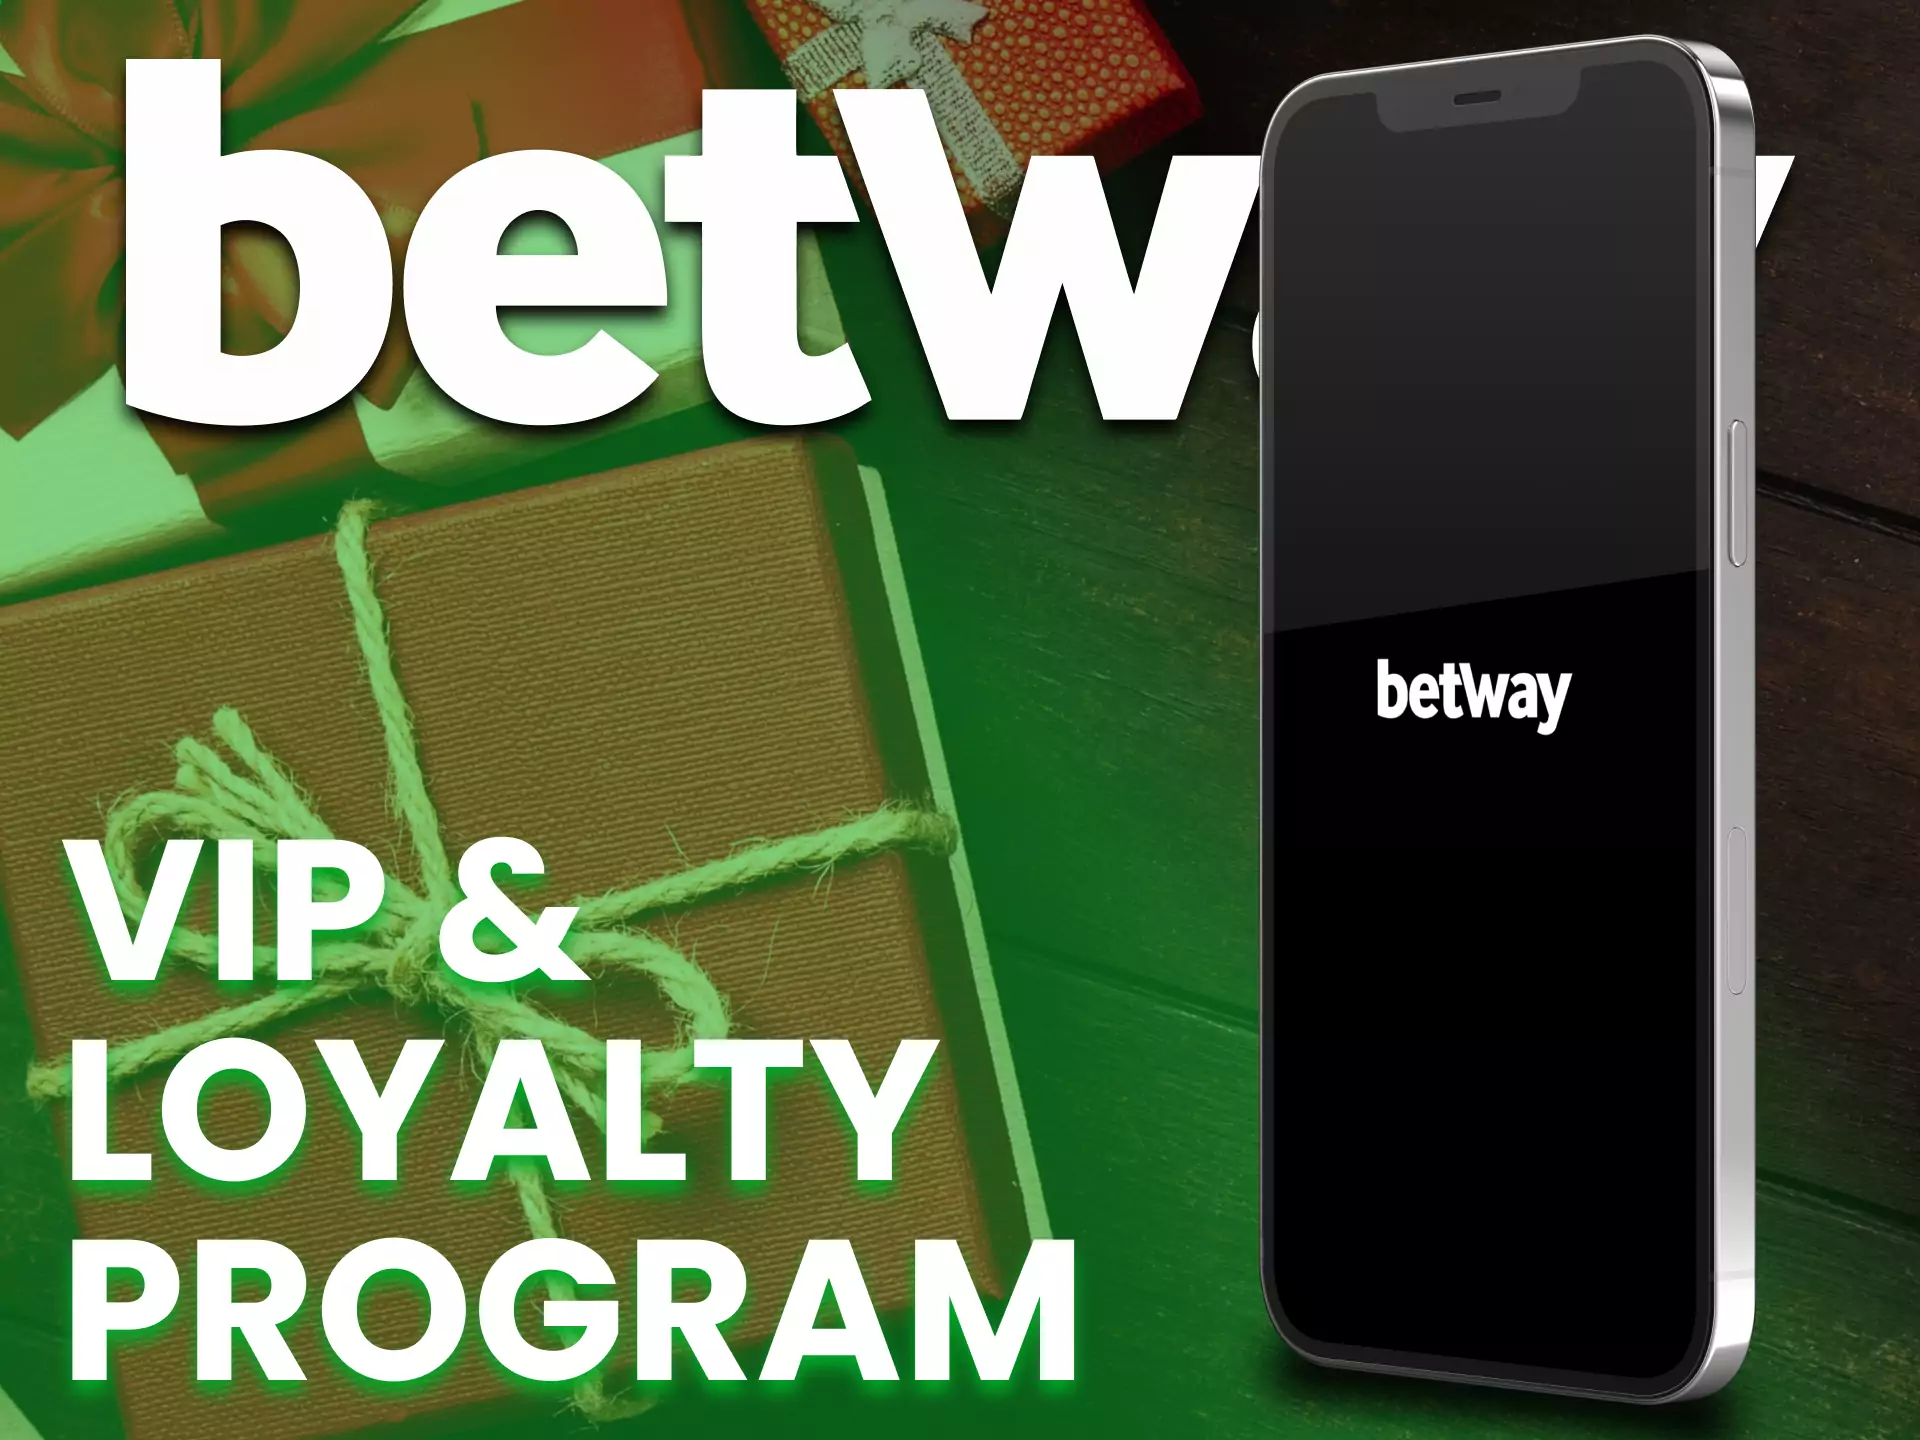 On the Betway app you have access to vip and loyalty programs.